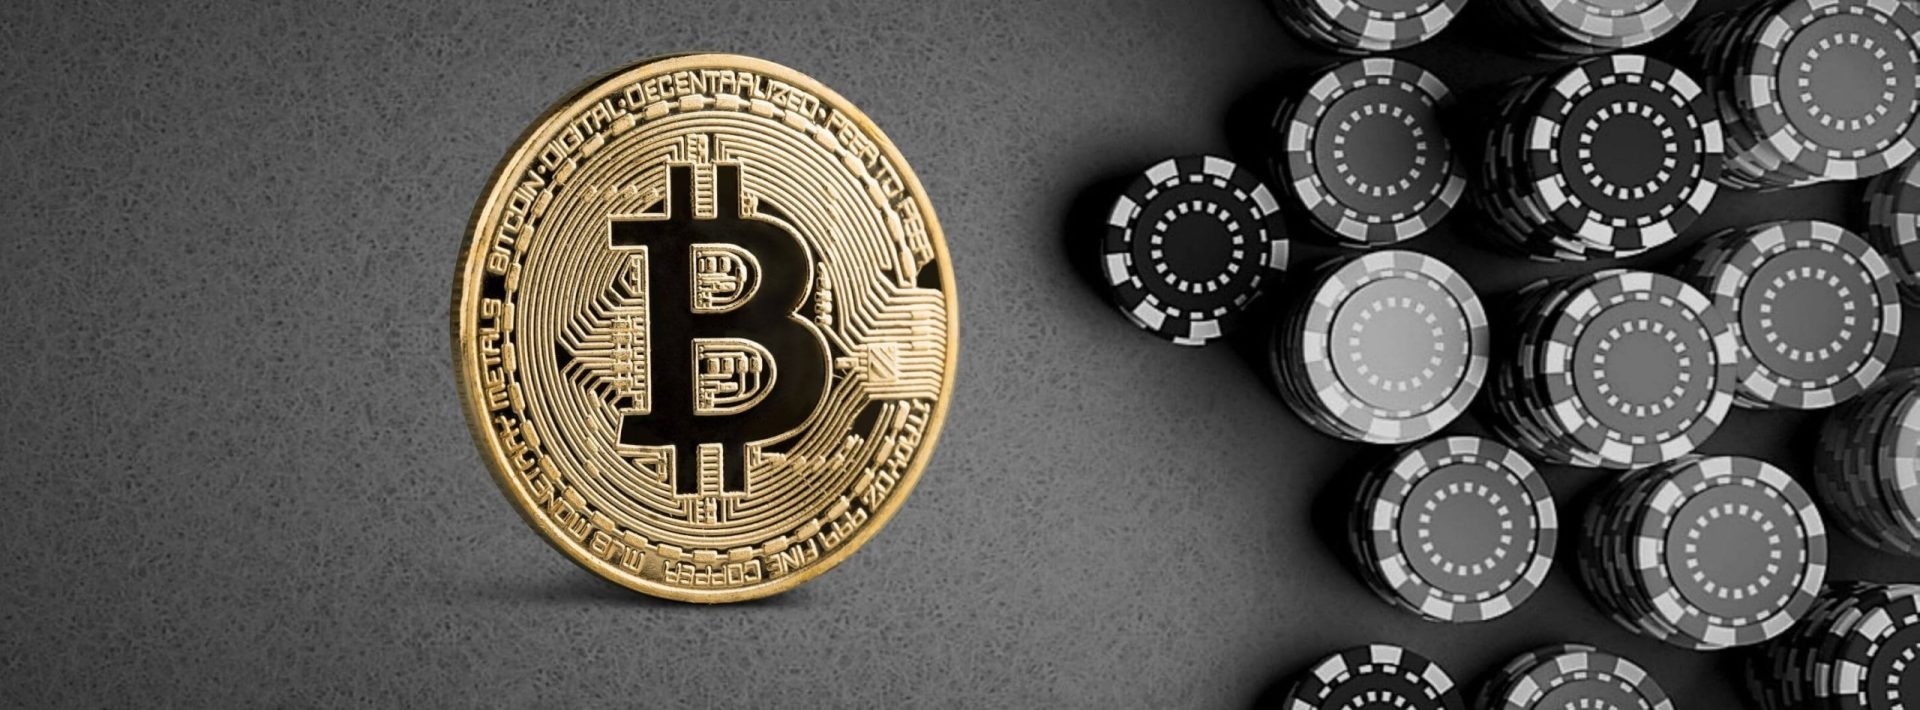 Crypto casino industry backed for 2023 growth